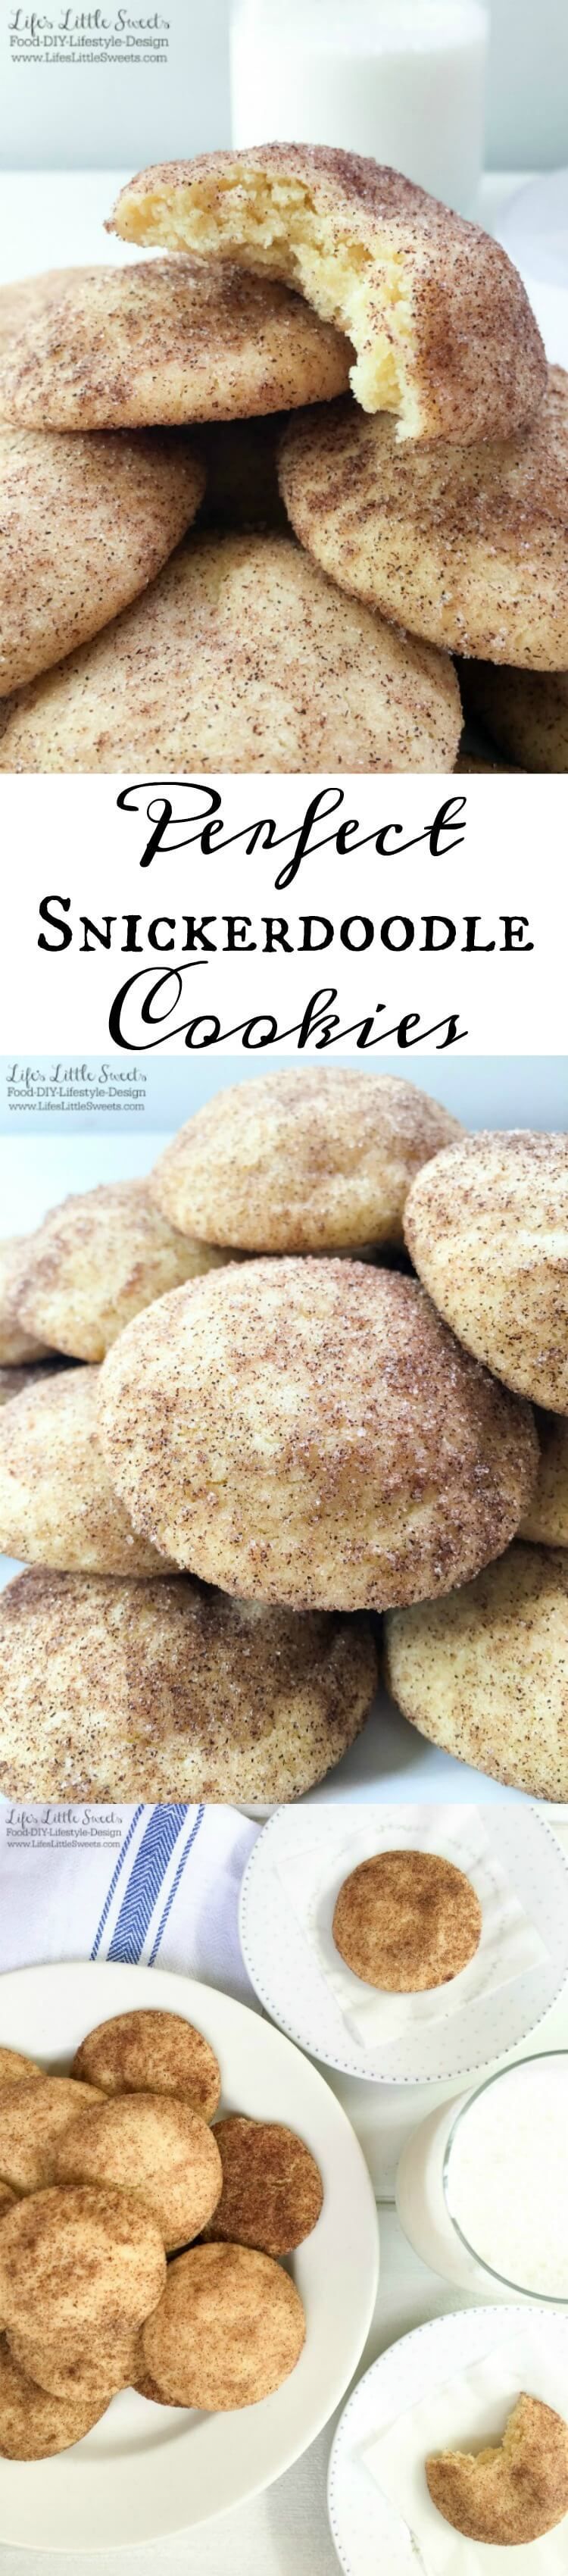 These Perfect Snickerdoodle Cookies have only 8 ingredients, and make the most aro